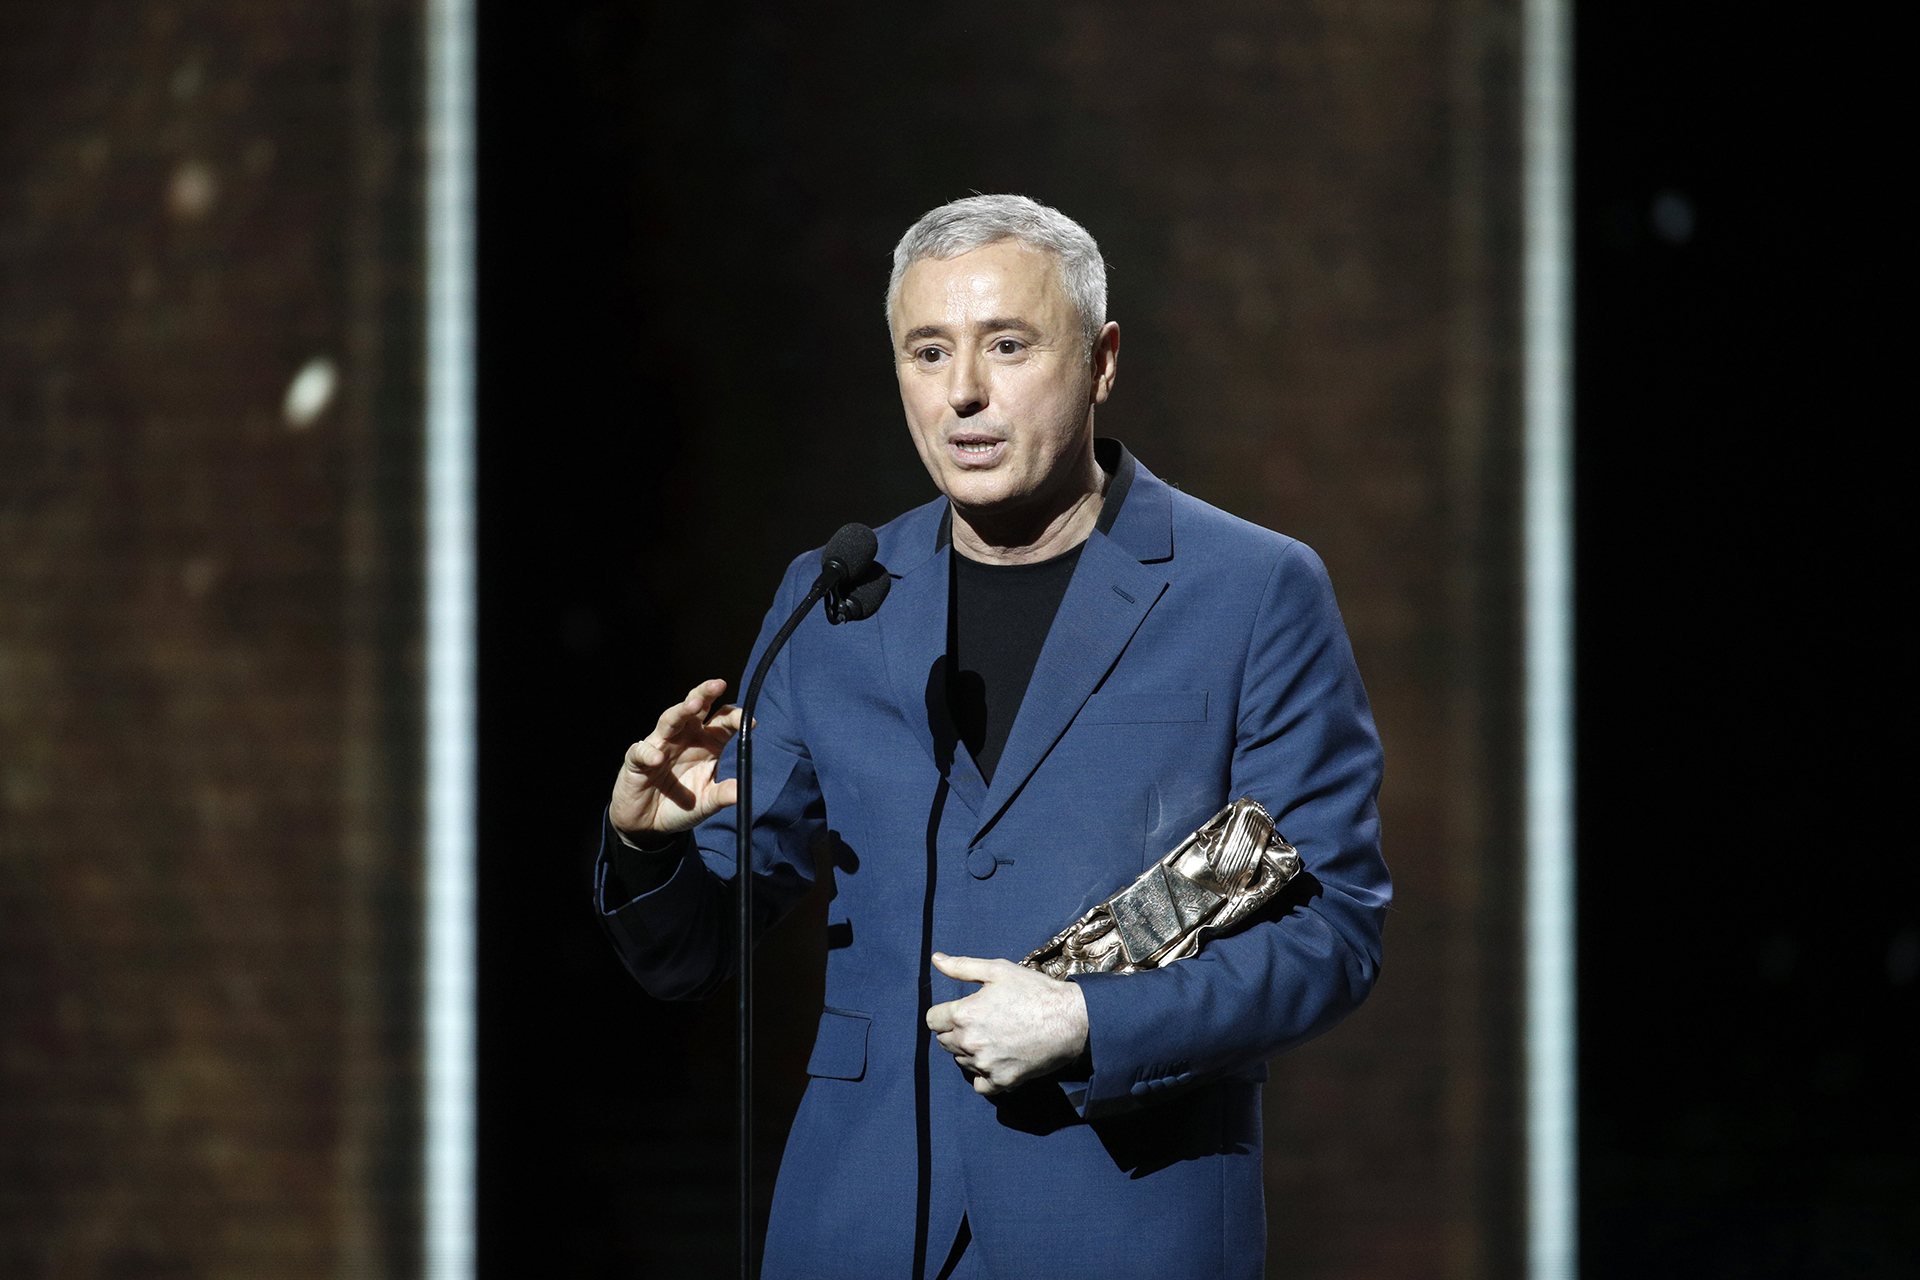 epa06575916 Robin Campillo receives the Best Originial Screenplay award for '120 Battements par minute' during the 43rd annual Cesar awards ceremony held at the Salle Pleyel concert hall in Paris, France, 02 March 2018.  EPA/YOAN VALAT